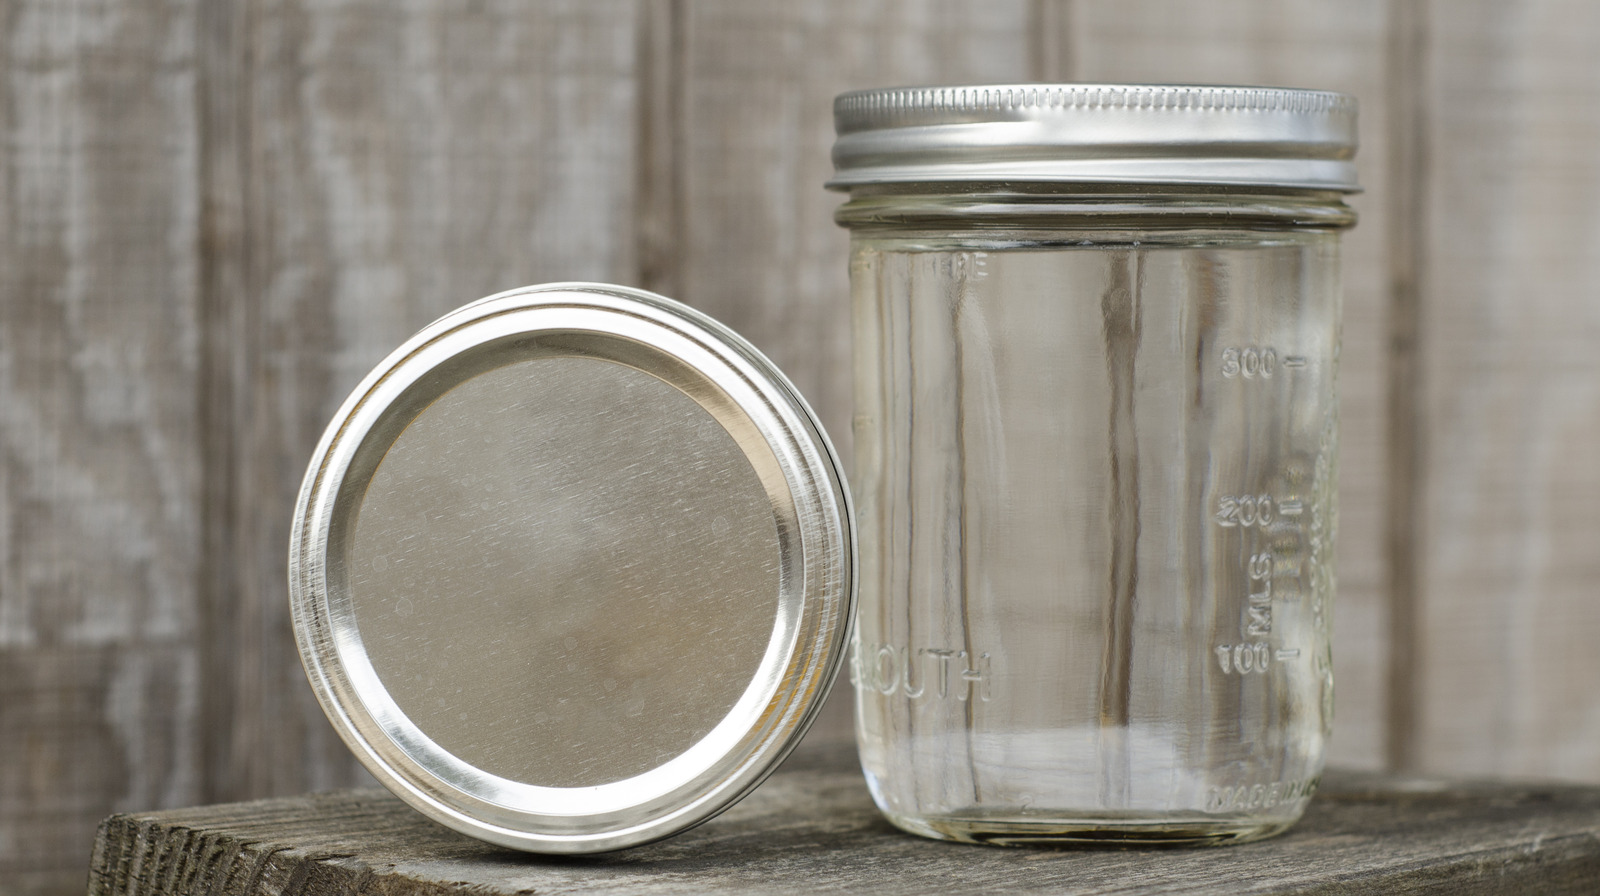 https://www.tastingtable.com/img/gallery/do-you-have-to-use-warm-lids-when-home-canning/l-intro-1672946979.jpg